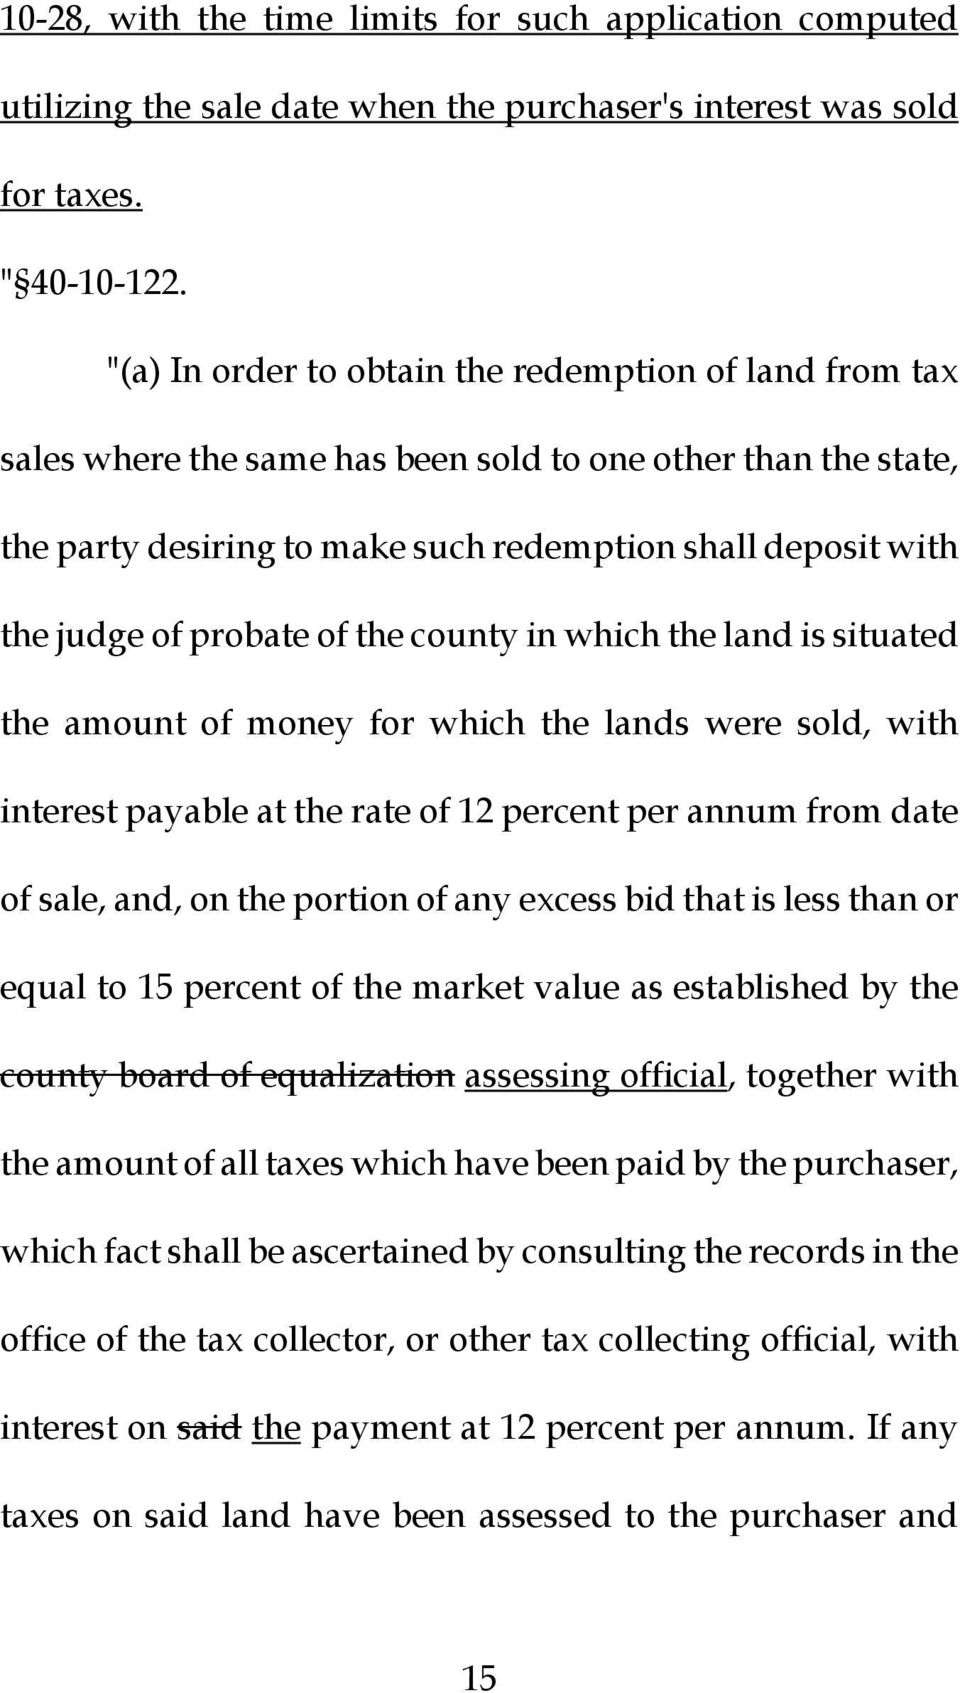 probate of the county in which the land is situated the amount of money for which the lands were sold, with interest payable at the rate of 12 percent per annum from date of sale, and, on the portion